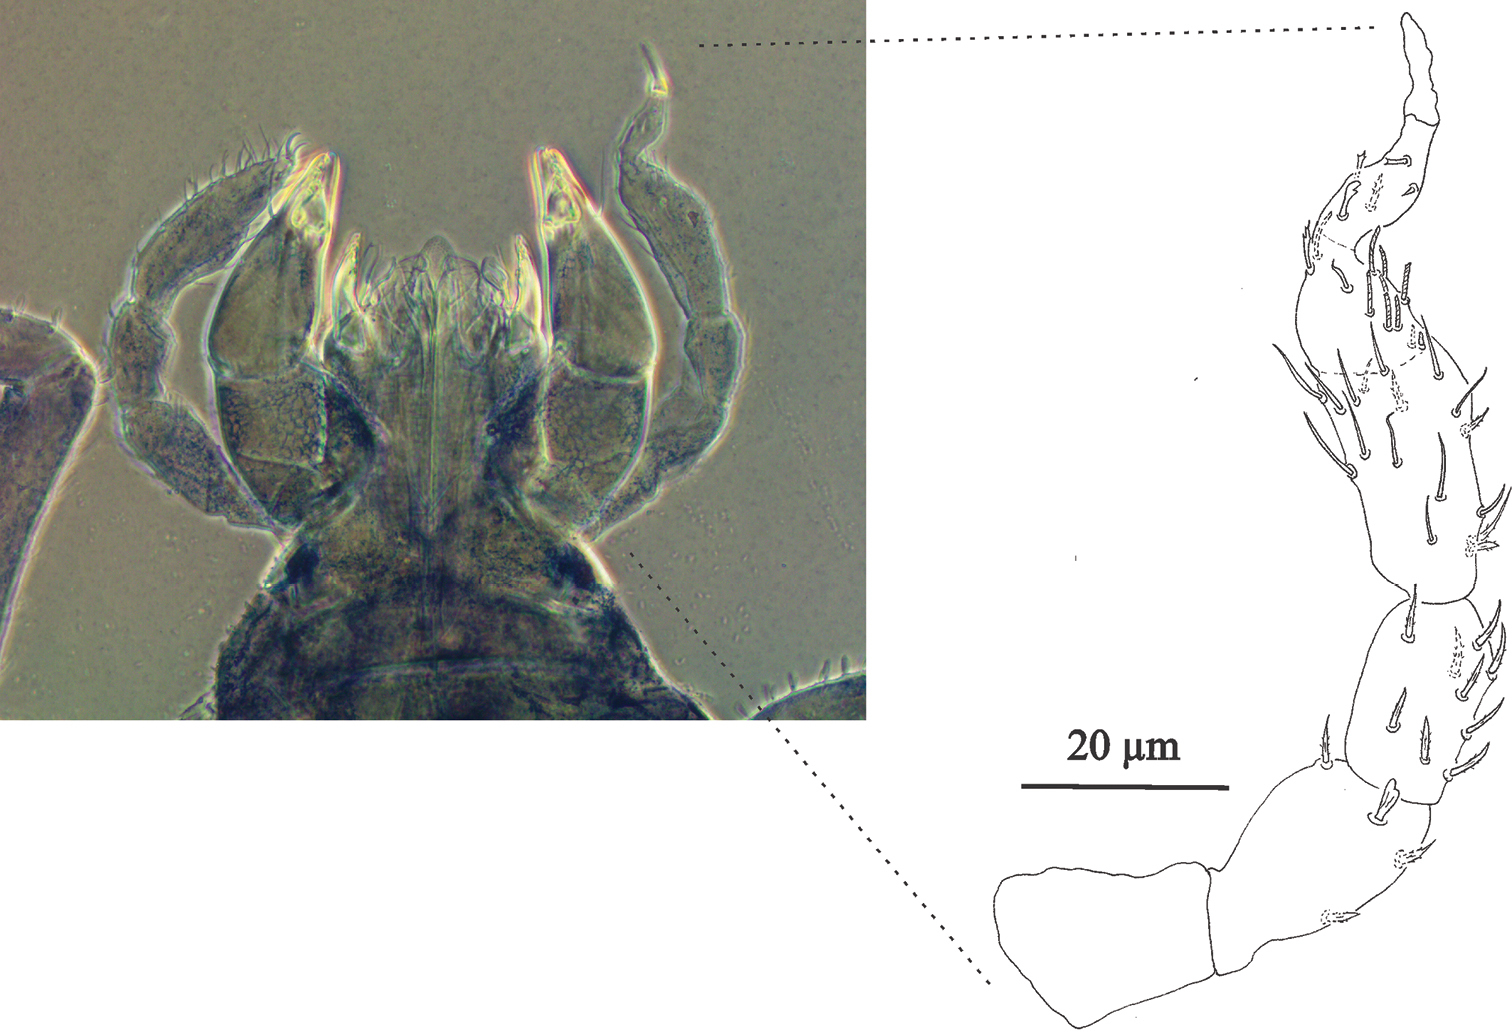 Neocarus spelaion sp. n.: Ventral (A) and dorsal (B) view of the palp